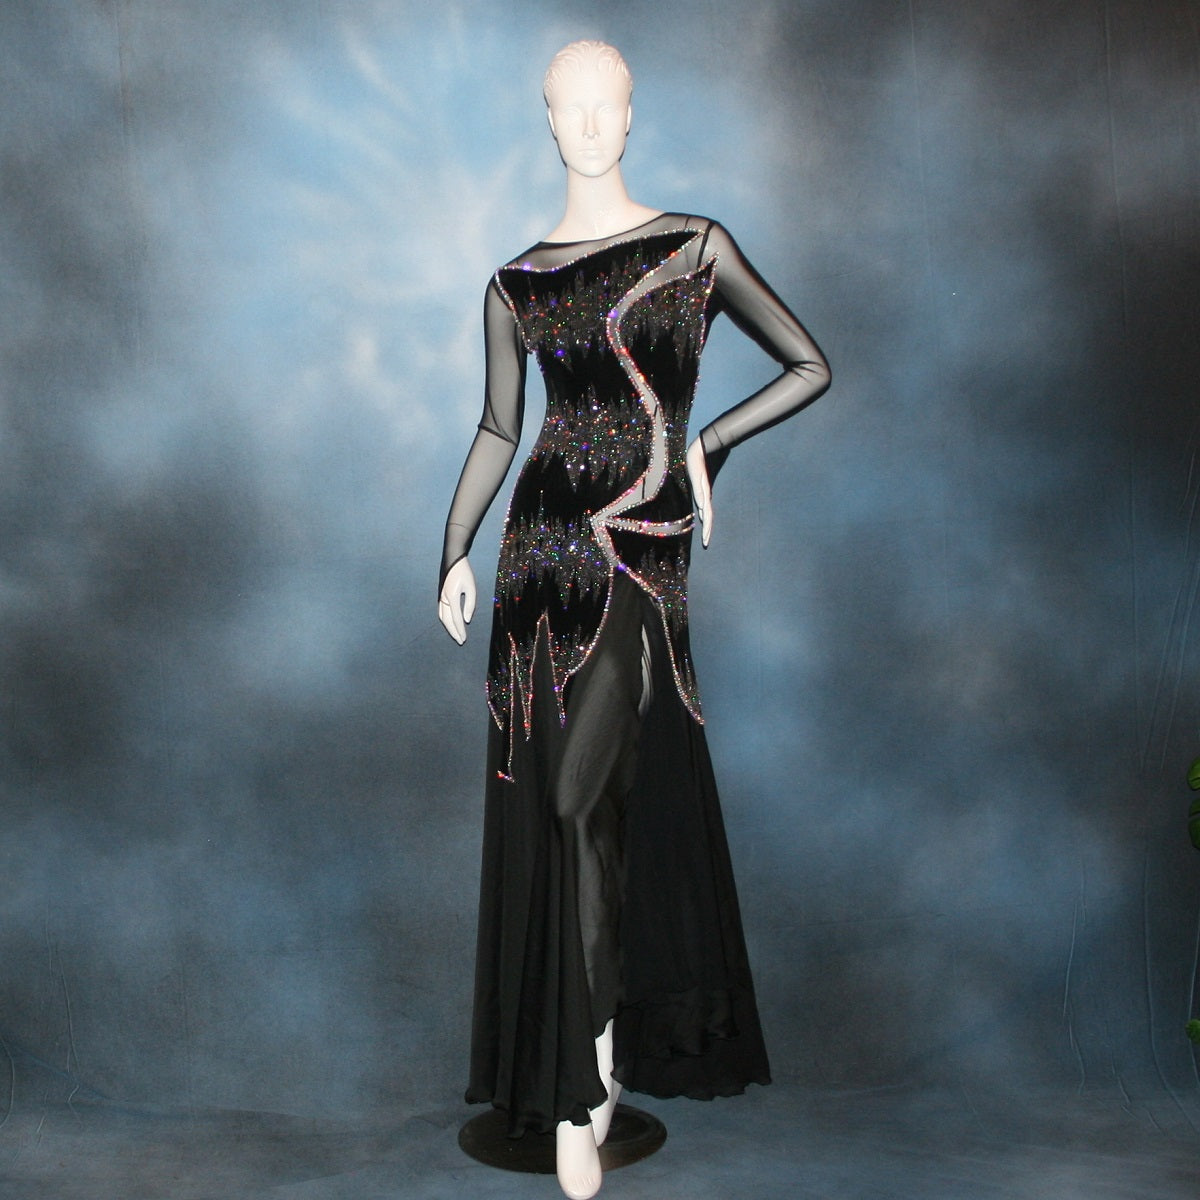 Crystal's Creations Latin/rhythm/converta ballroom dress created in black glitter slinky with an awesome electrifying Crystal AB glitter pattern artistically placed on a black stretch mesh base, embellished with Swarovski Crystal AB rhinestone work. It includes 3 skirts so you have 4 different looks for versatility.